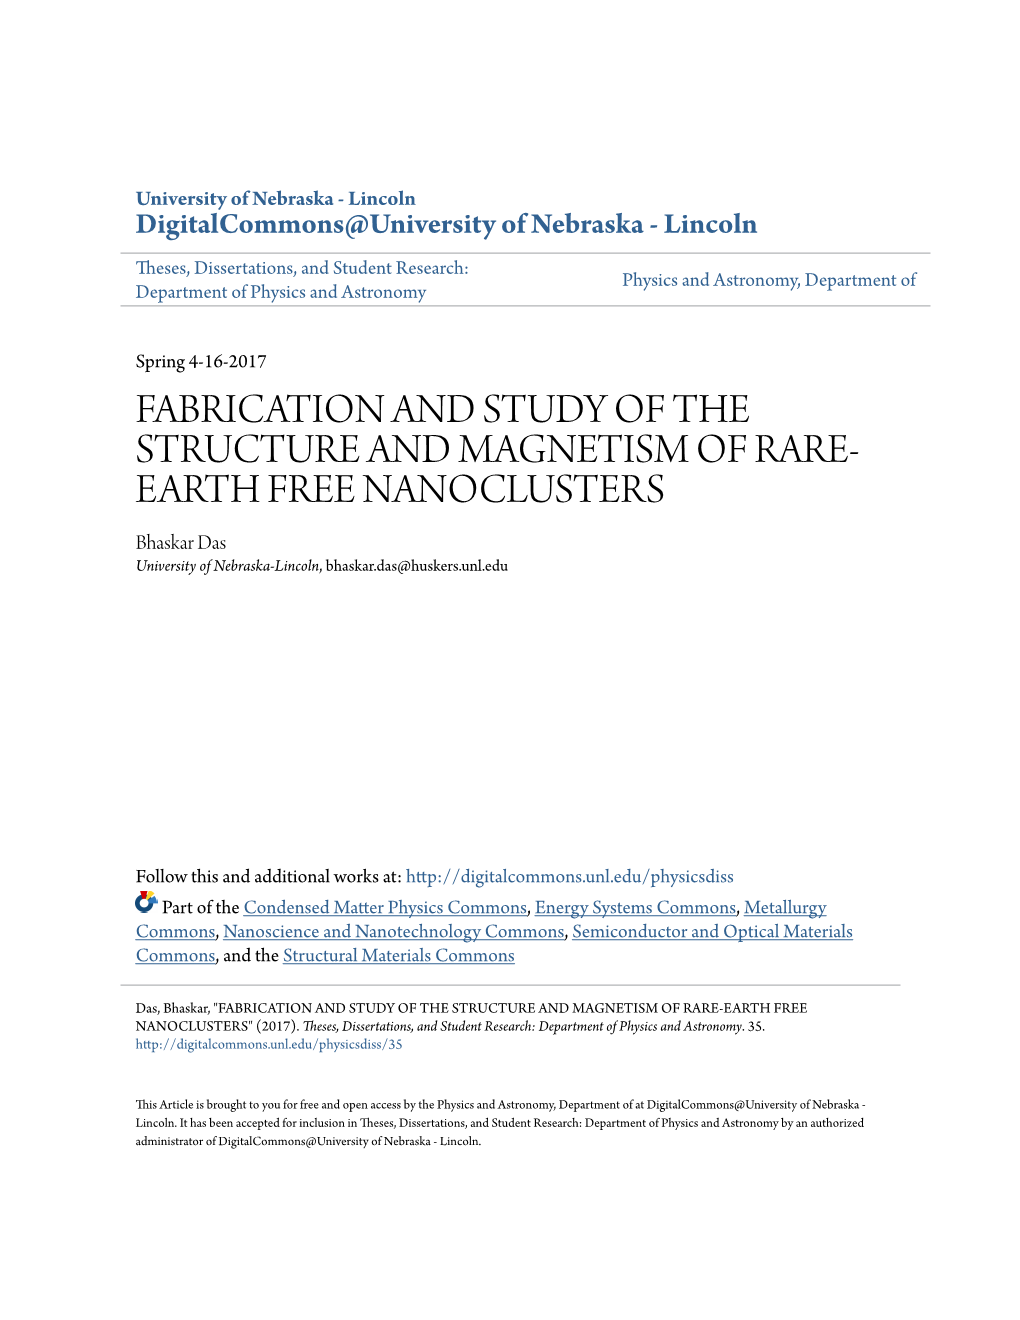 Fabrication and Study of the Structure and Magnetism of Rare-Earth Free Nanoclusters" (2017)